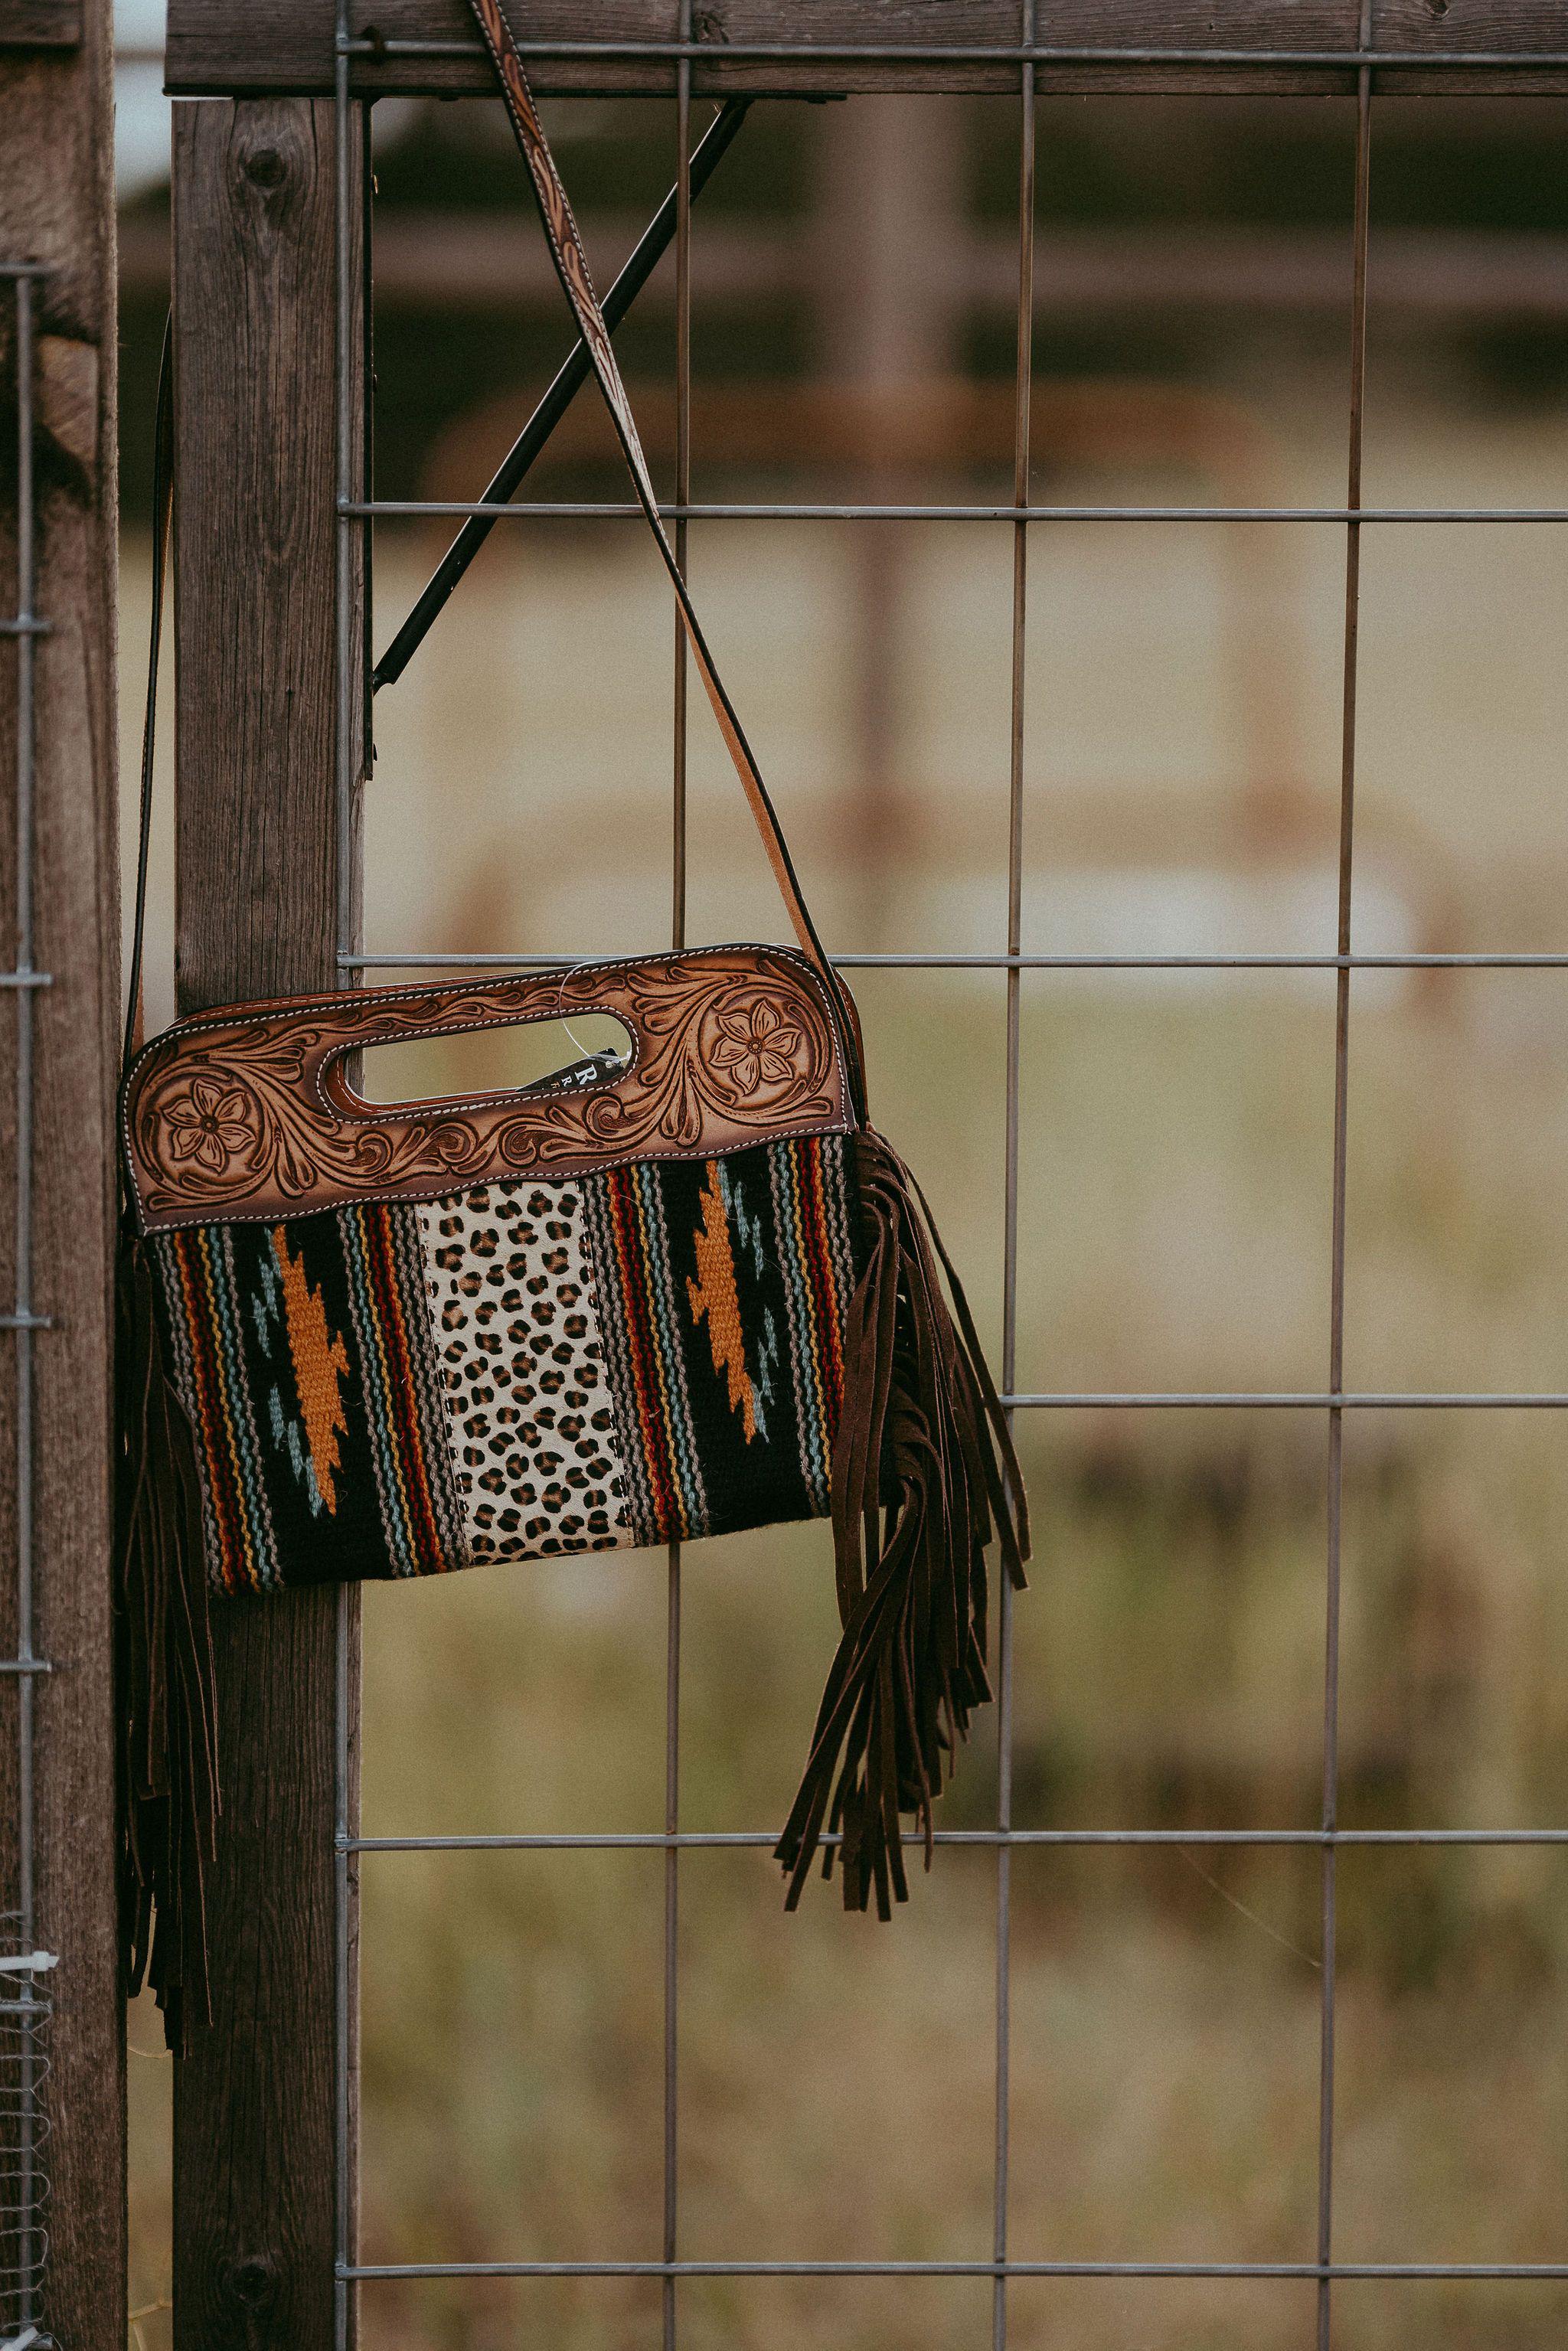 Saddle Blanket and Leopard Clutch